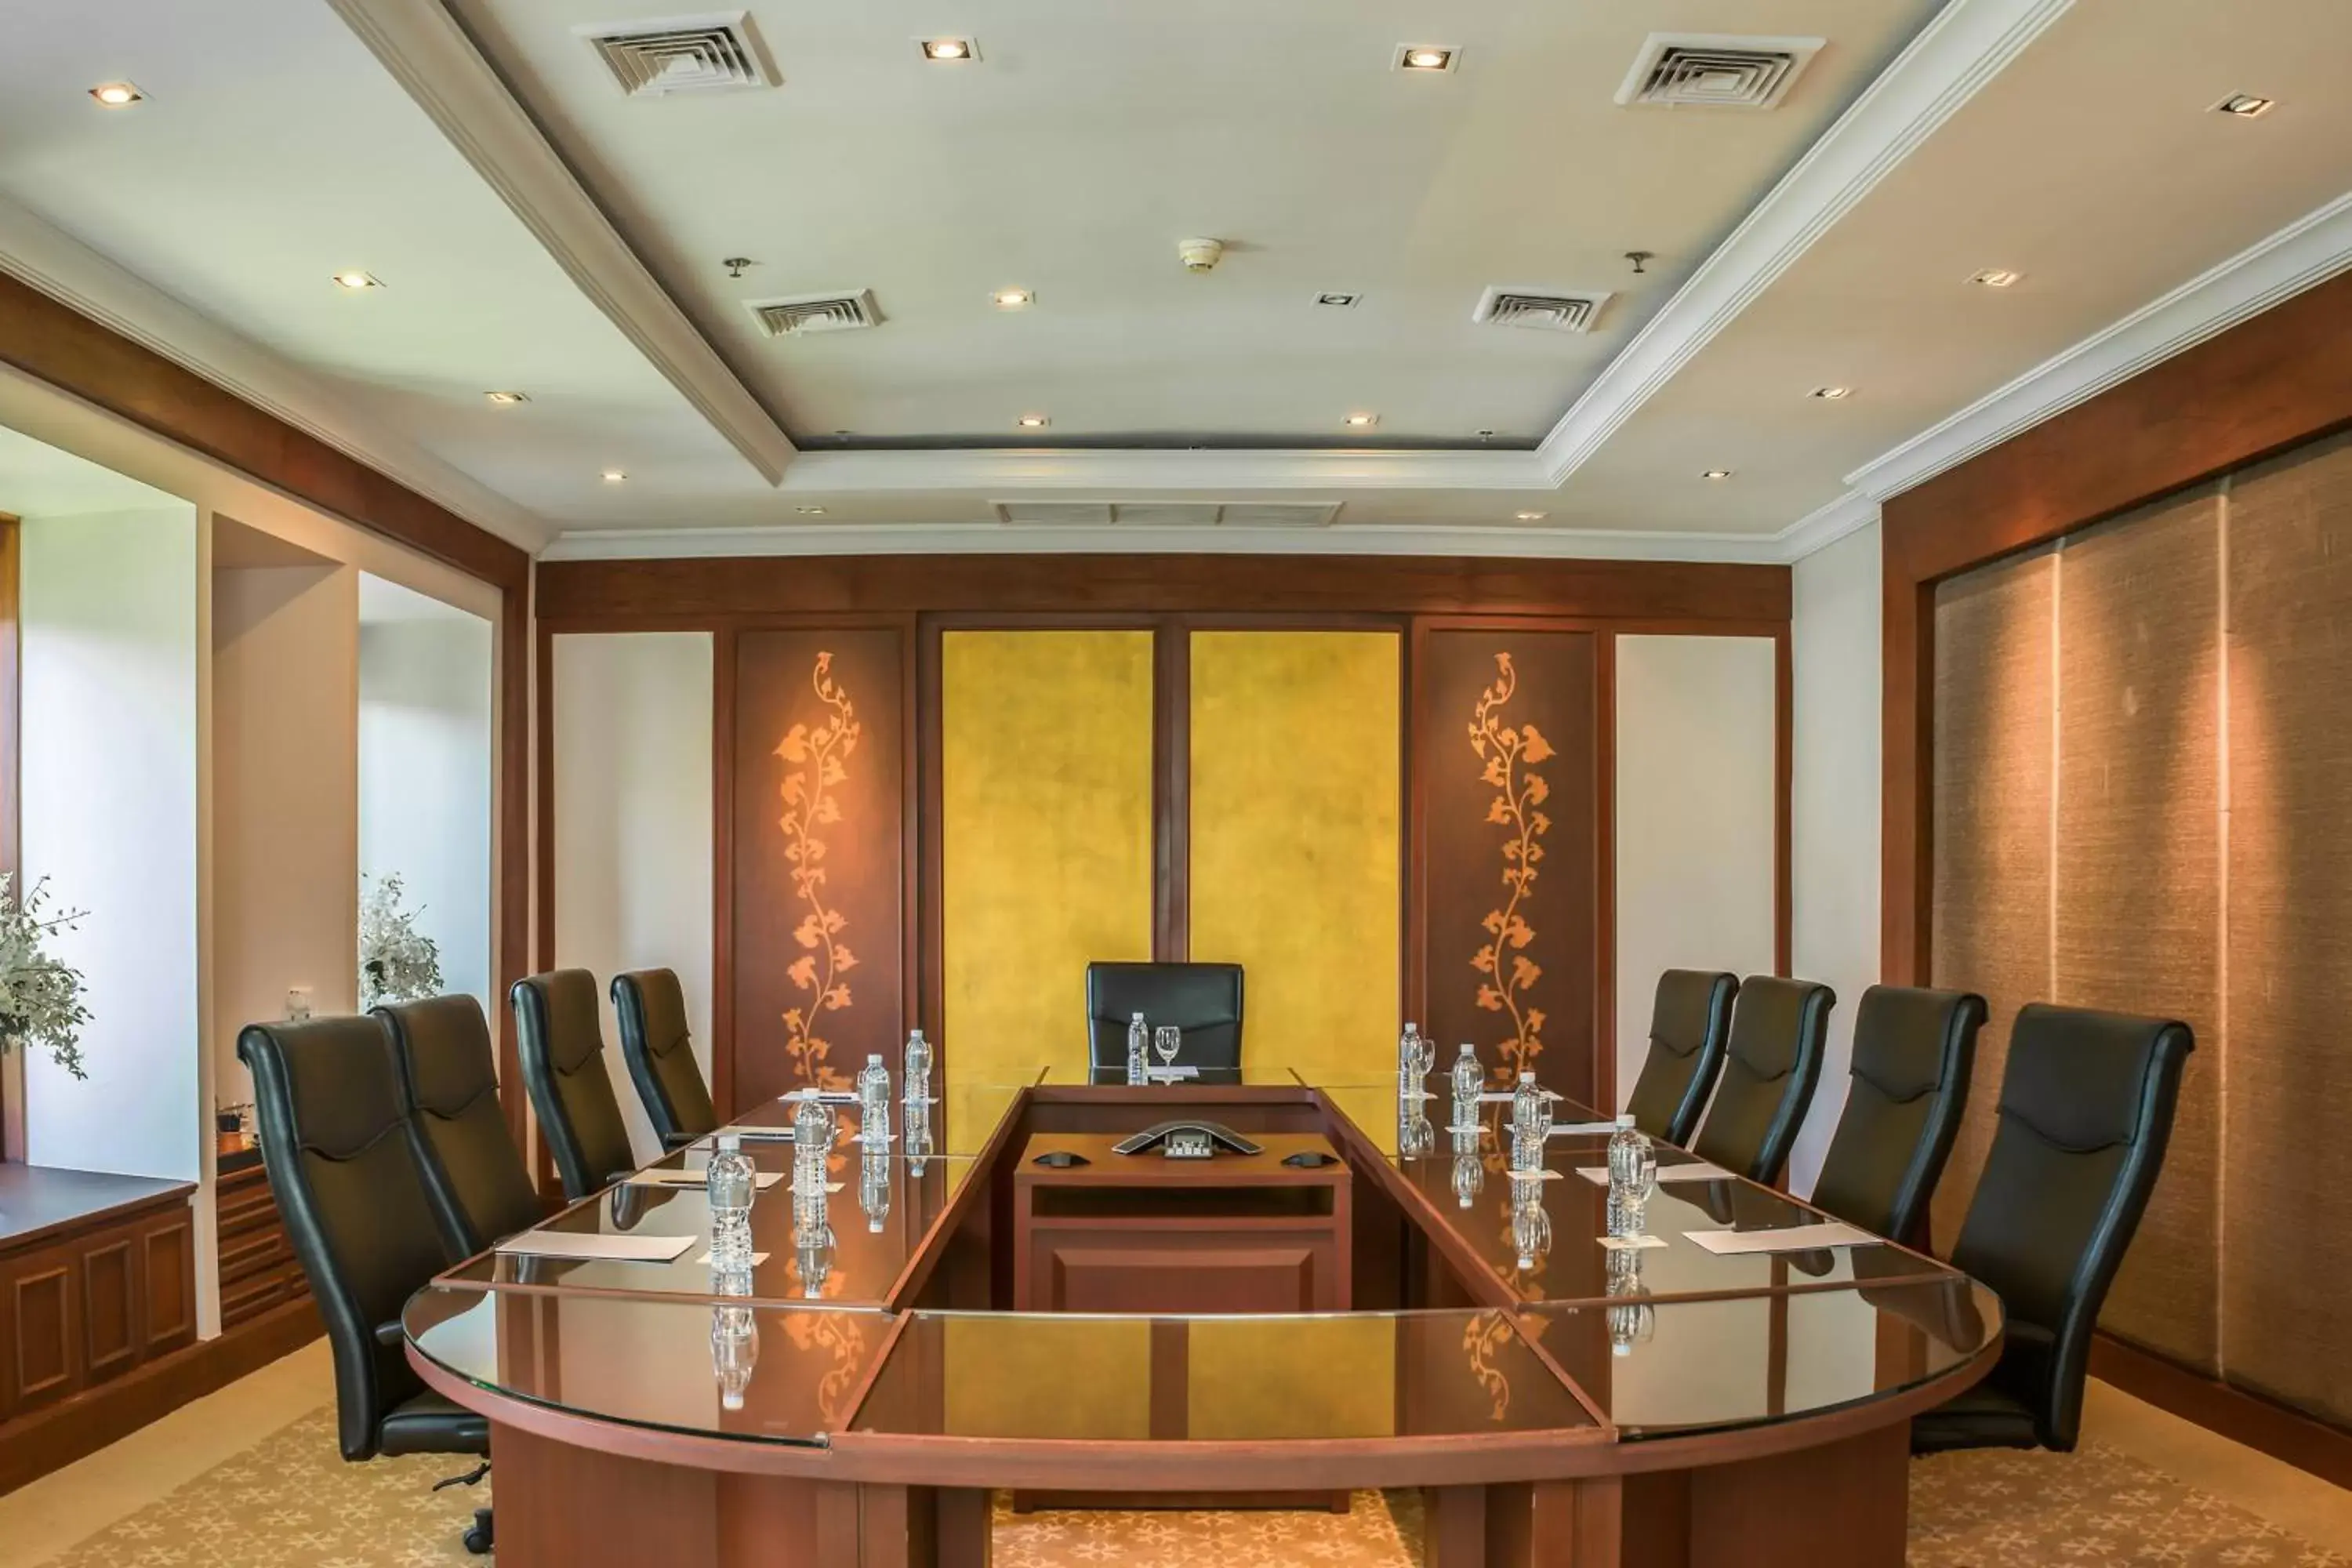 Meeting/conference room in JW Marriott Khao Lak Resort and Spa